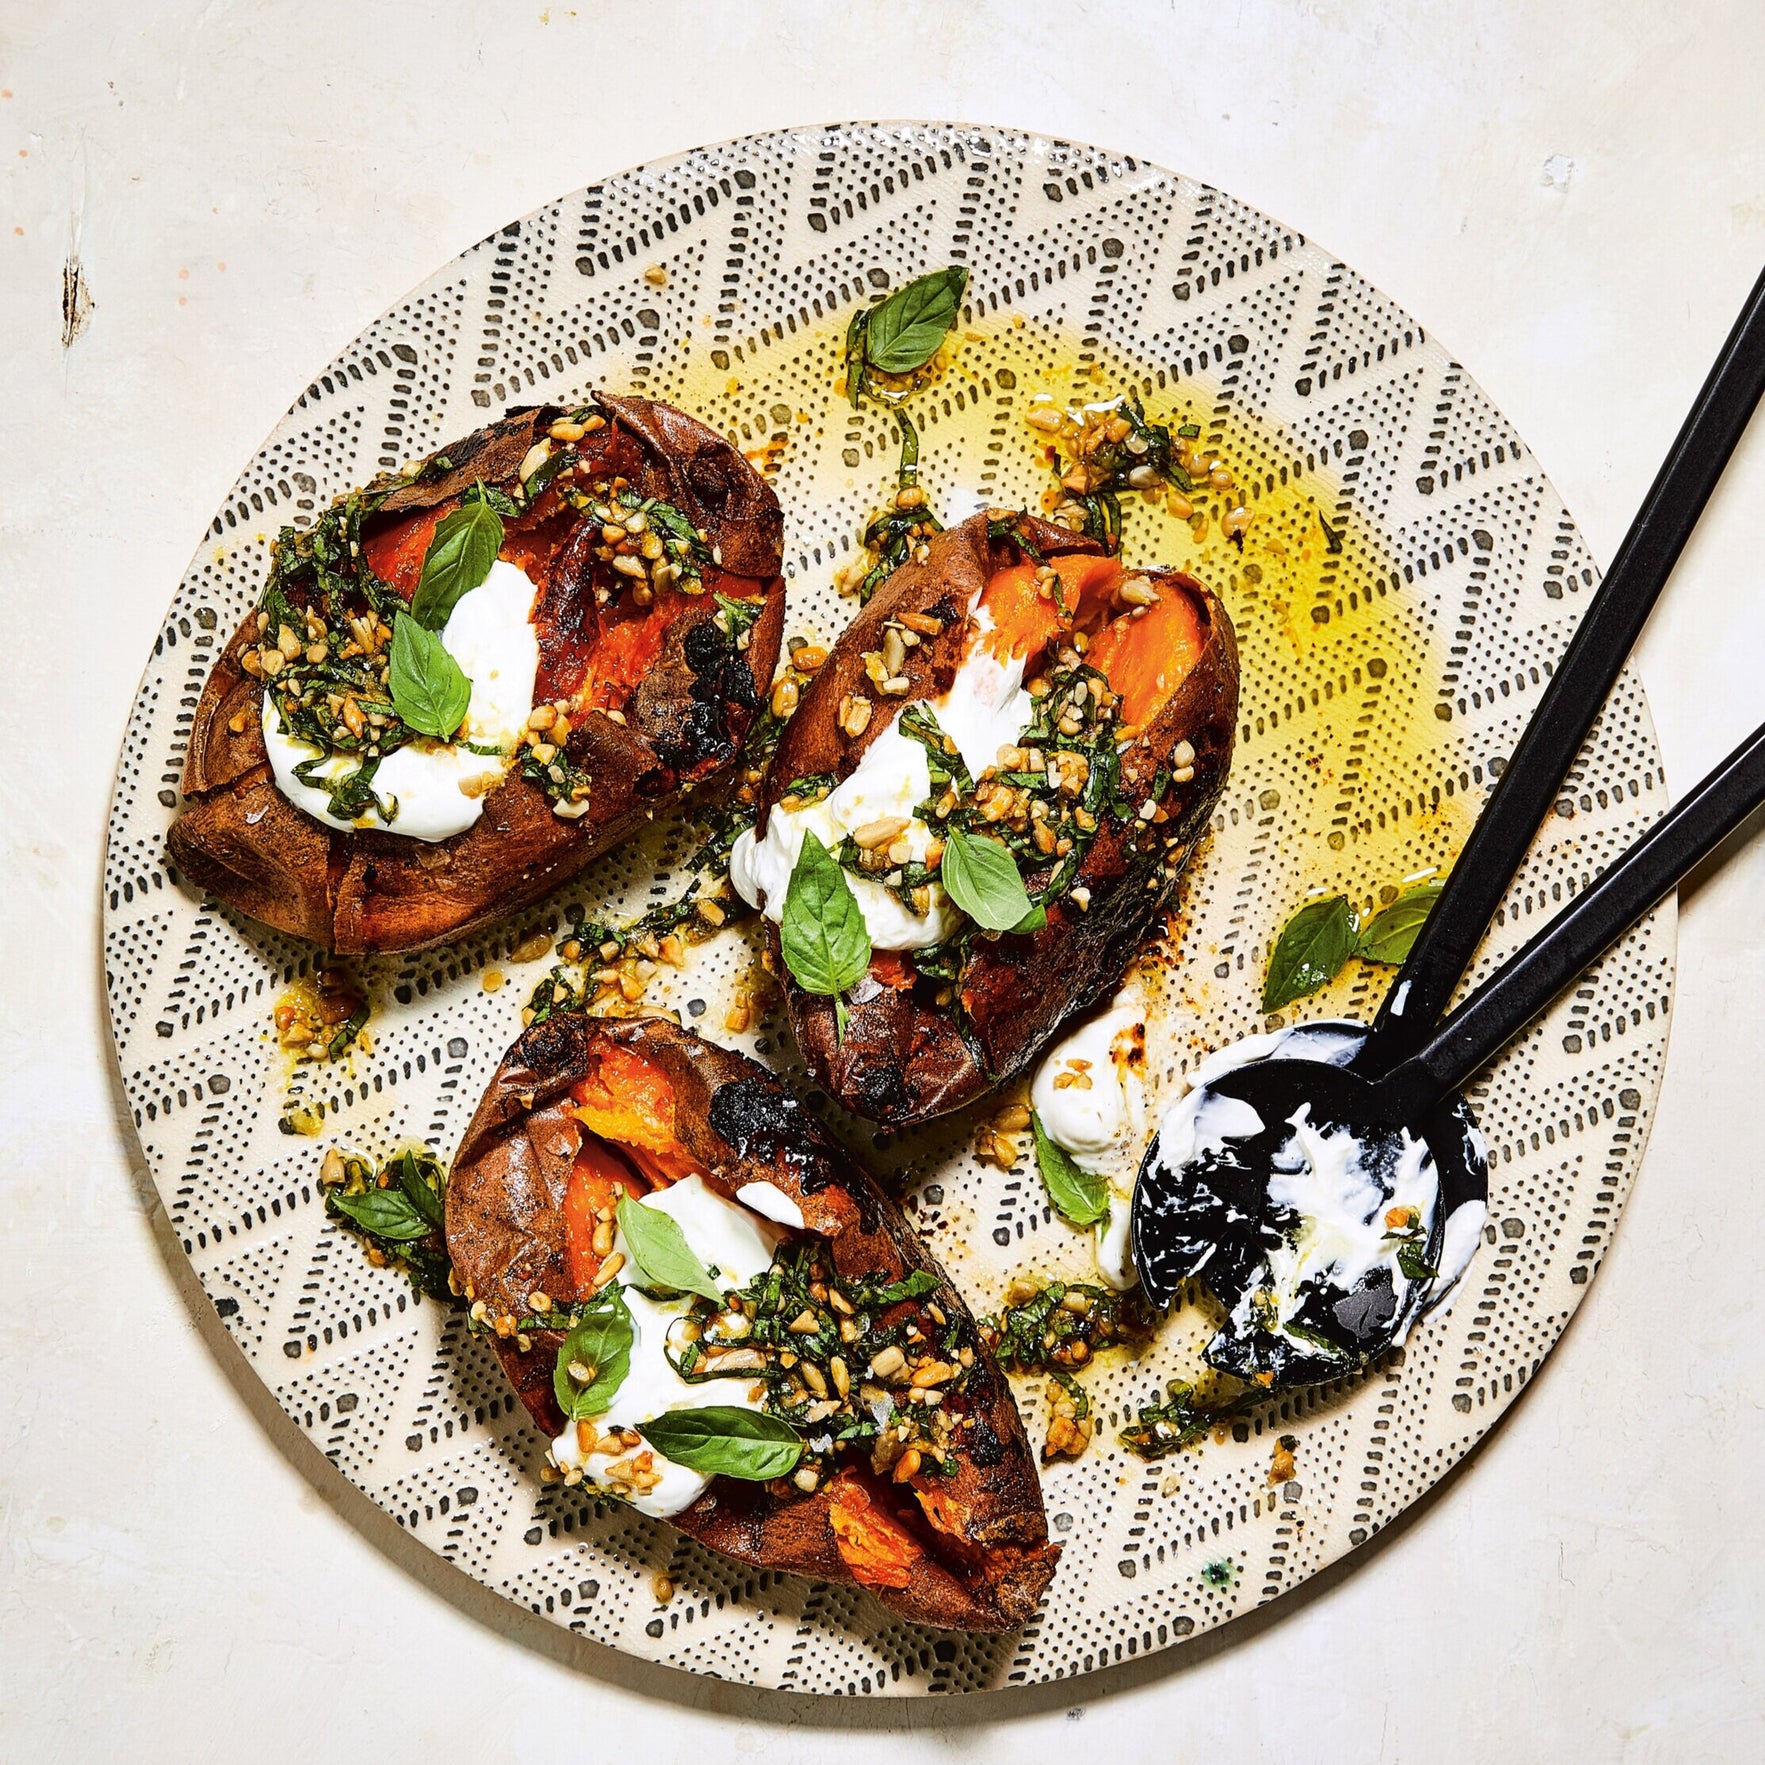 Eden Grinshpan's Whole-Roasted Sweet Potato with Sunflower Gremolata and Lemony Sour Cream